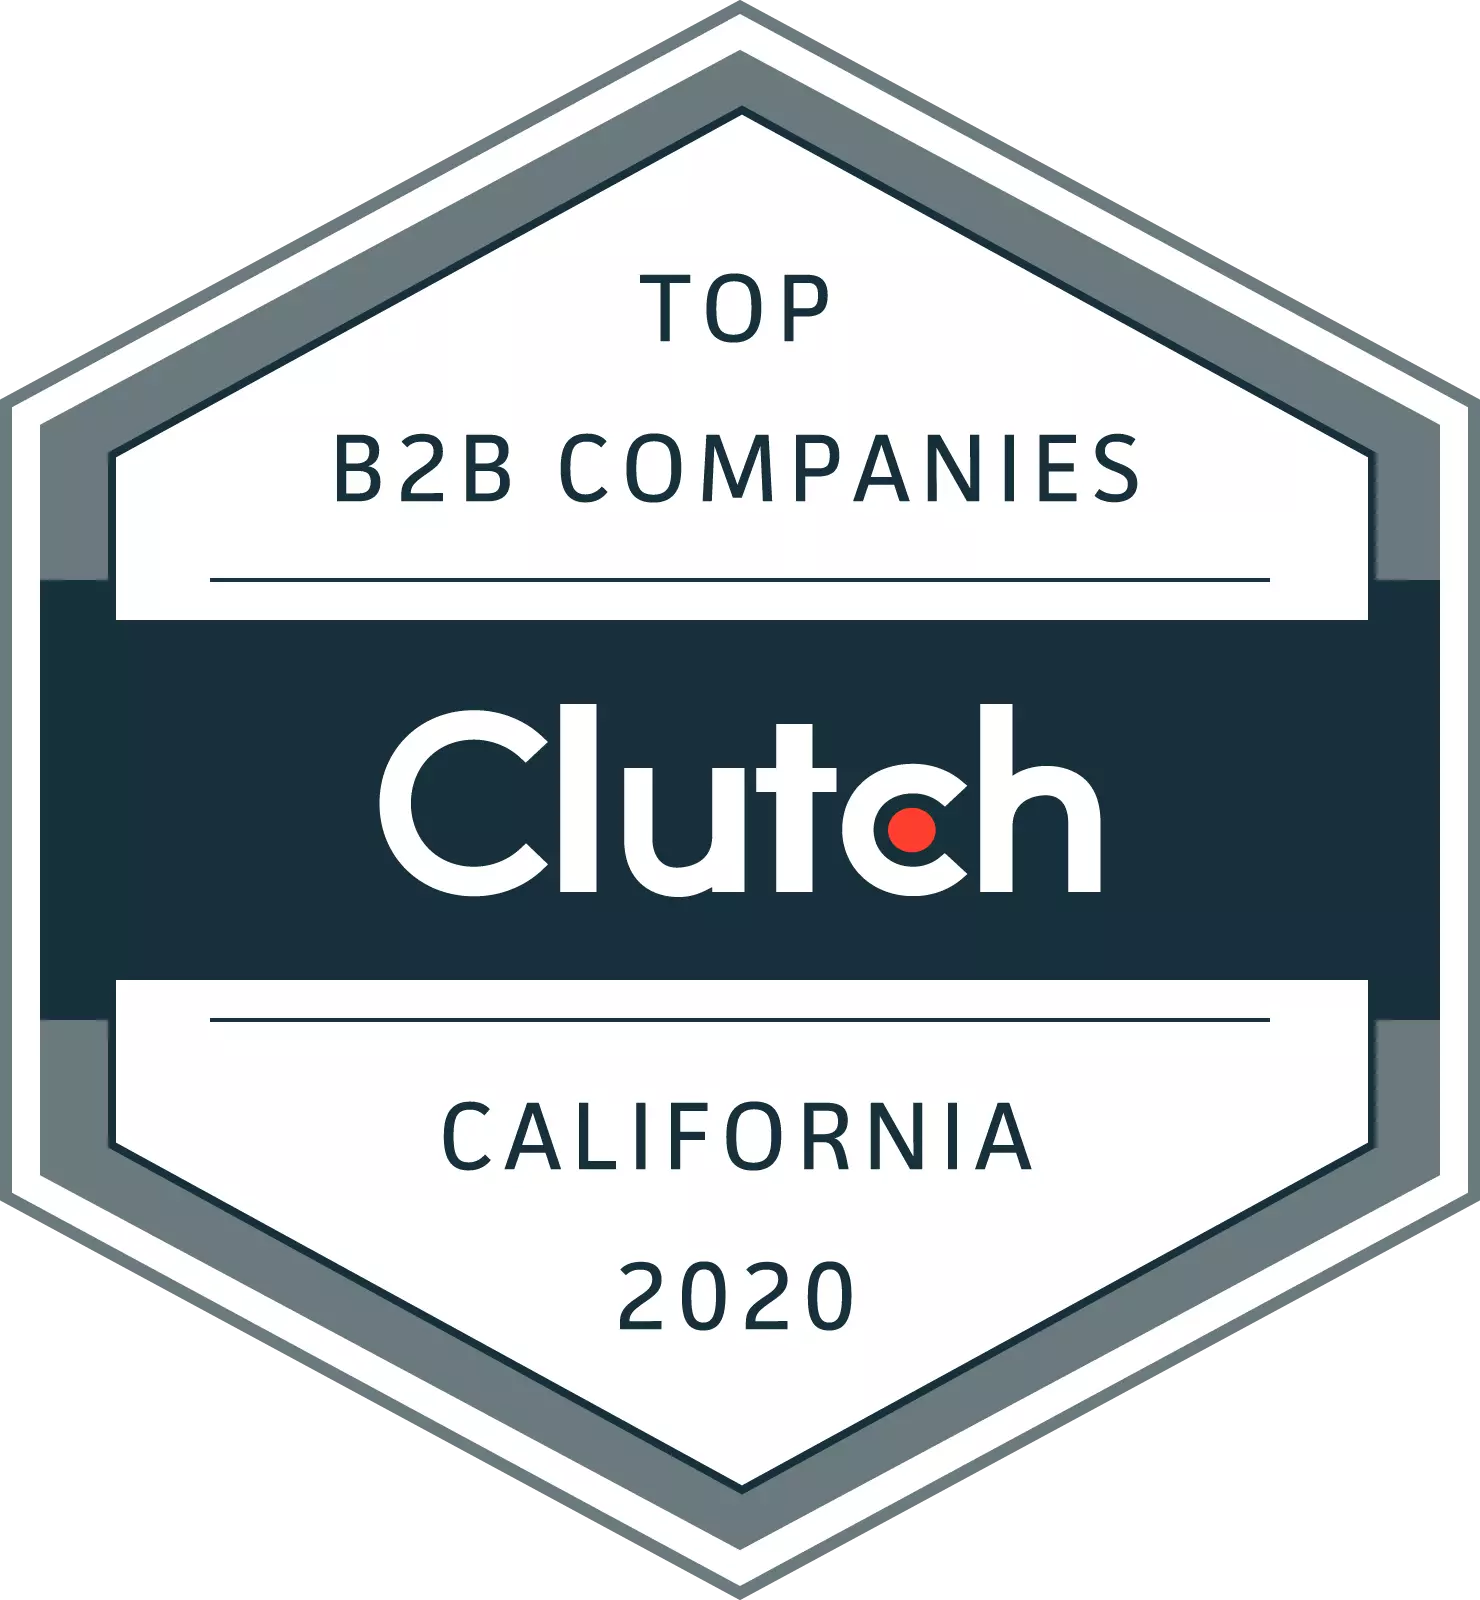 Named a Top B2B Service Provider in California
As a key player for several startups within California, and across the U.S., HypeLife Brands is honored to be named by Clutch for the award.
etc